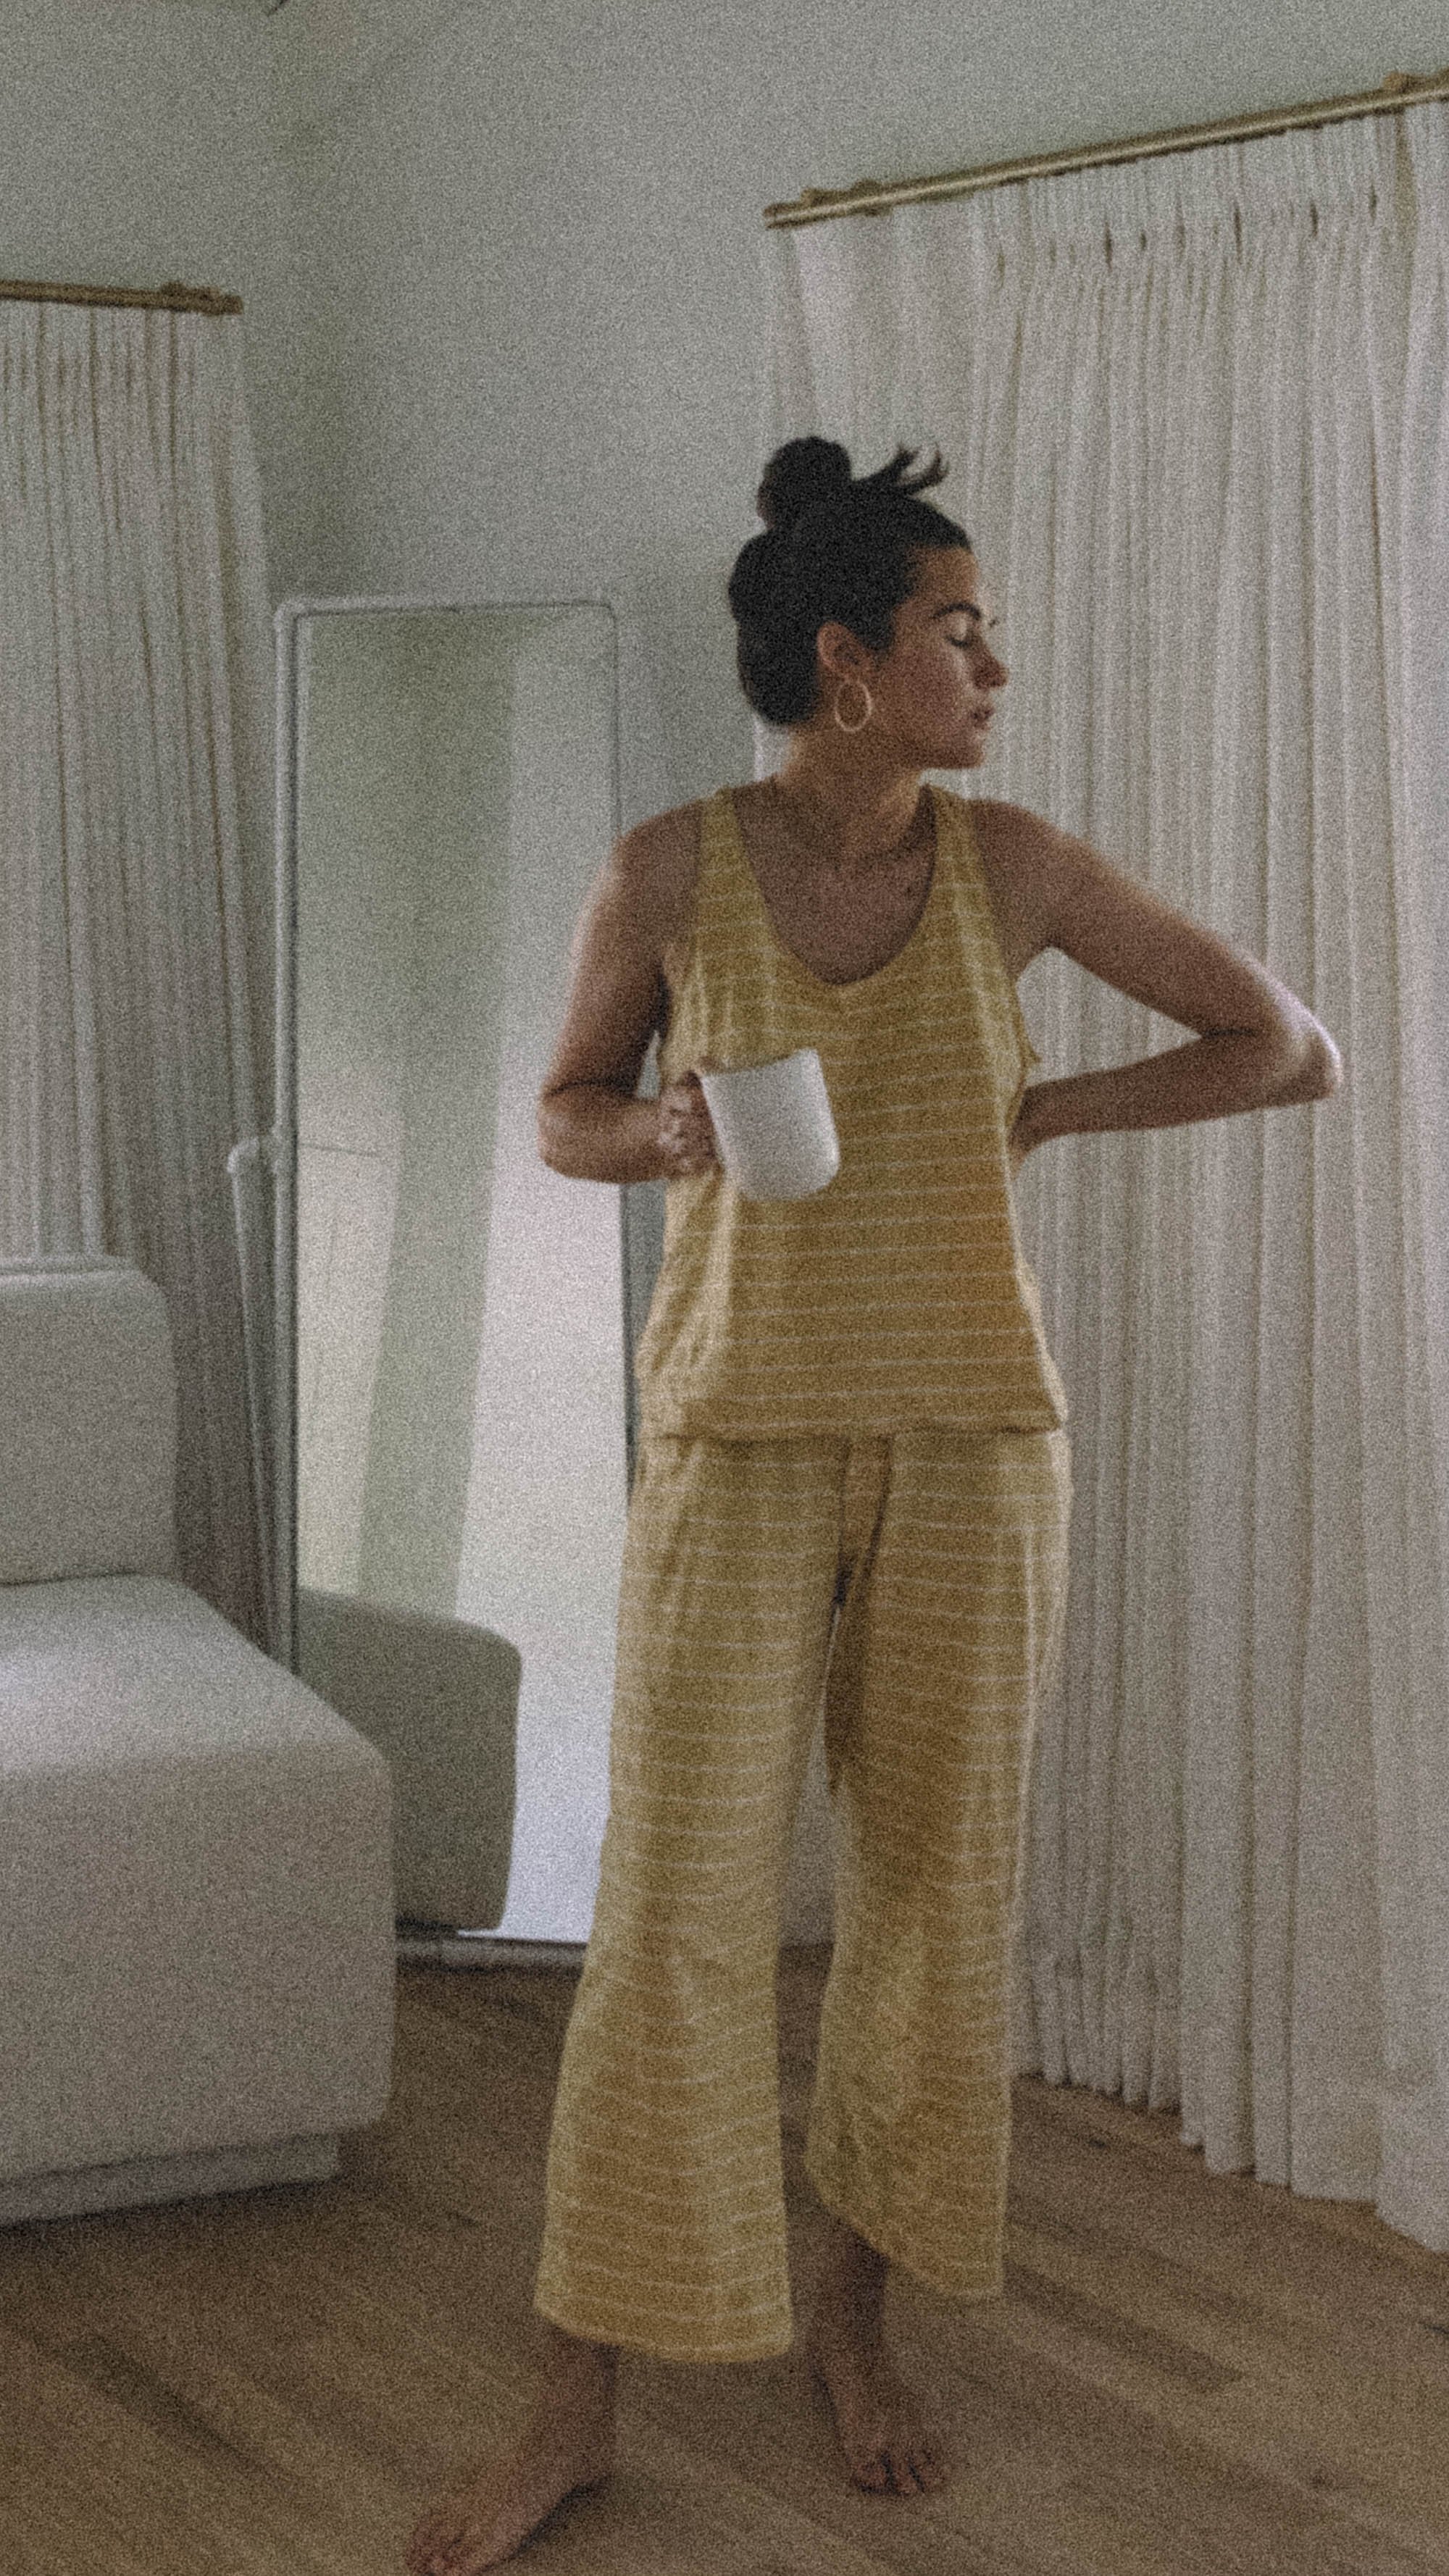 Sarah Butler of @sarahchristine wearing softest cotton pajama 2-piece sleep set made with Organic Cotton in a Fair Trade Certified factory - 10.jpg